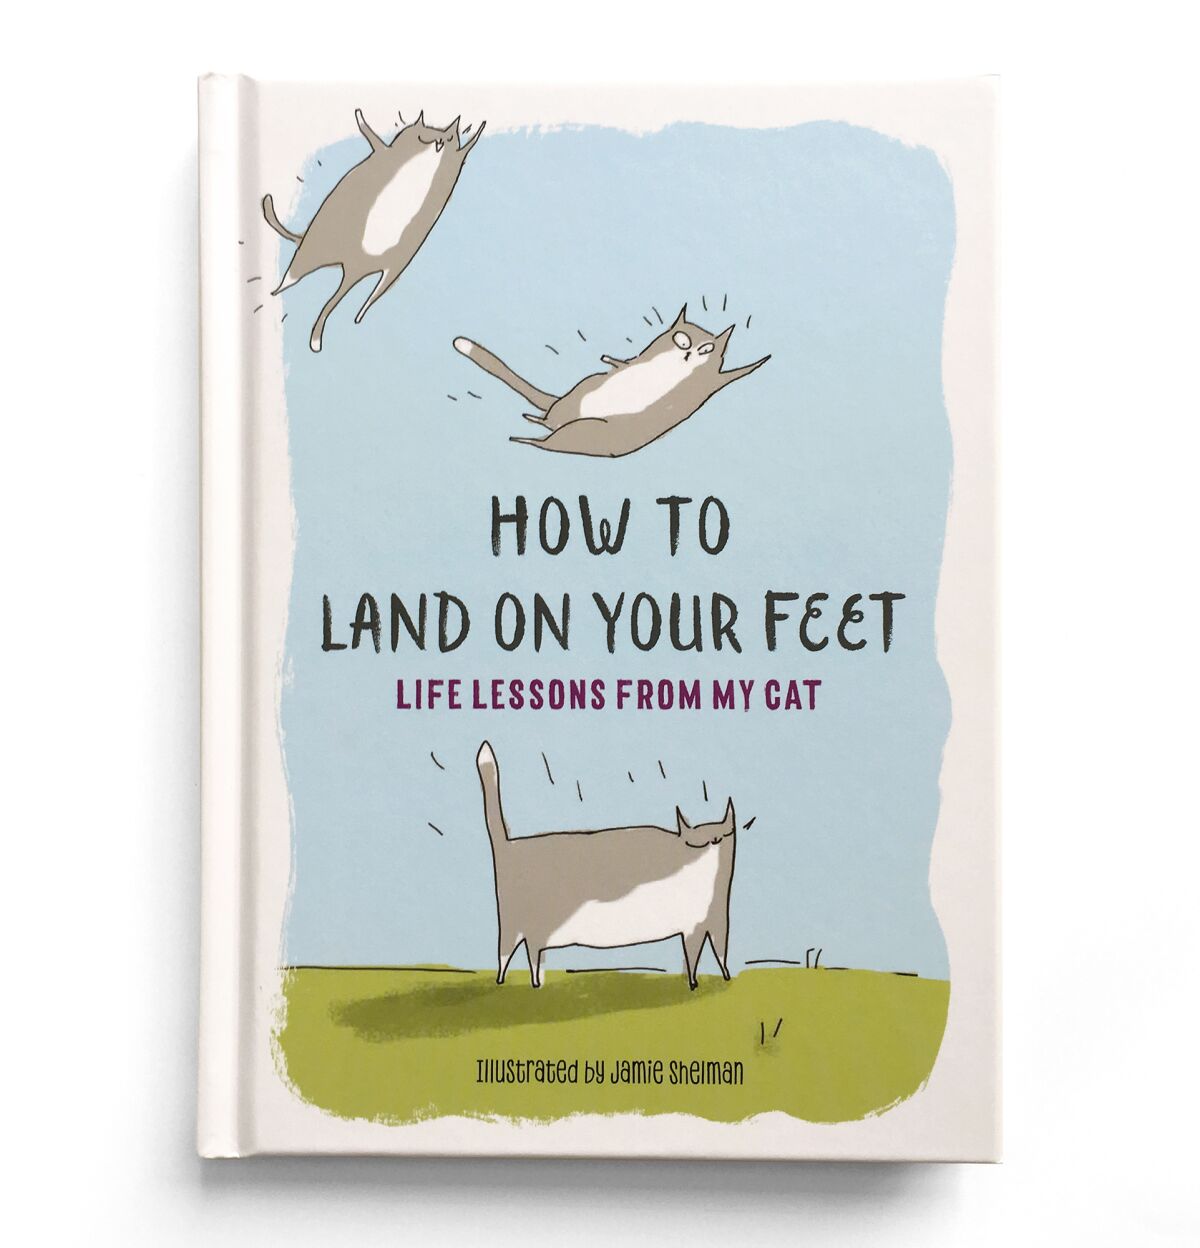 How to Land on Your Feet. Life Lessons From My Cat by Jamie Shelman Credit: The Experiment